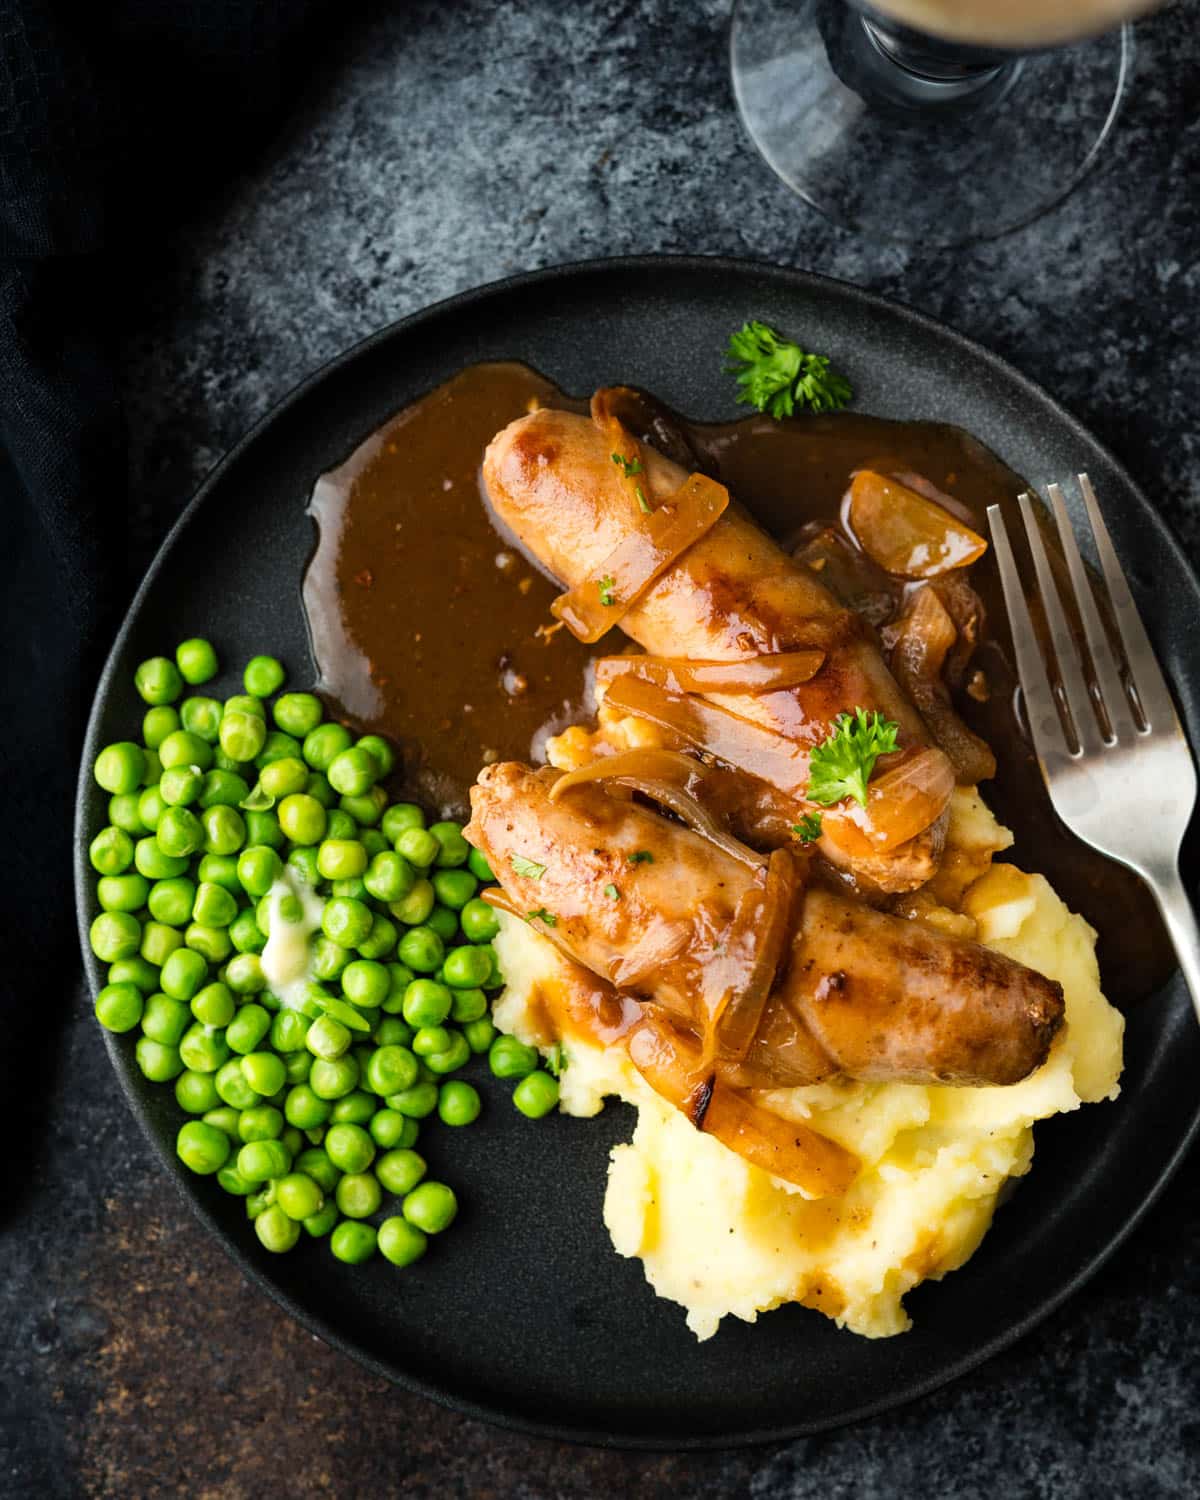 Serving bangers and mash with peas.